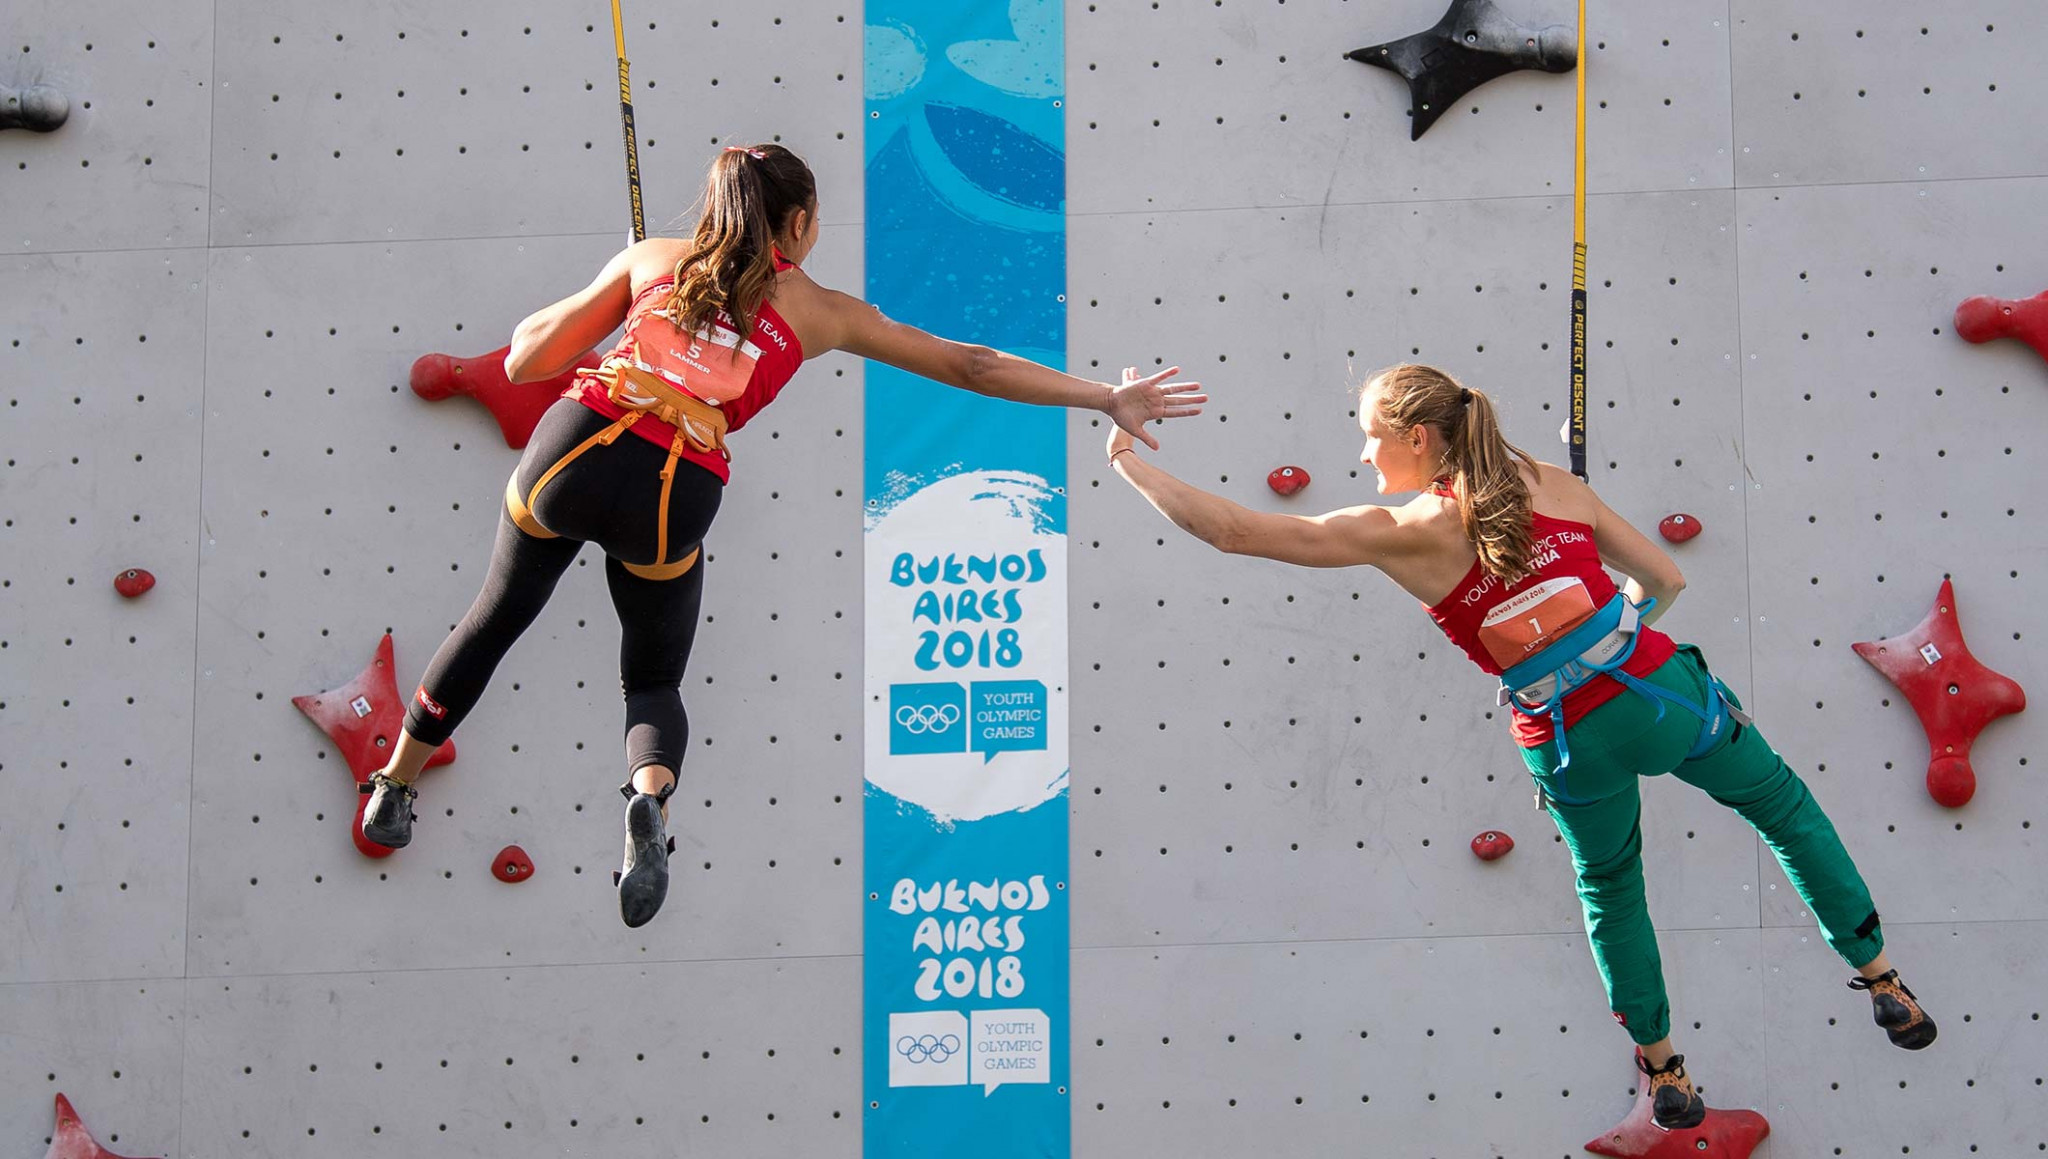 Sport climbing featured at the 2018 Summer Youth Olympic Games in Buenos Aires and will return at Dakar 2022 ©Getty Images